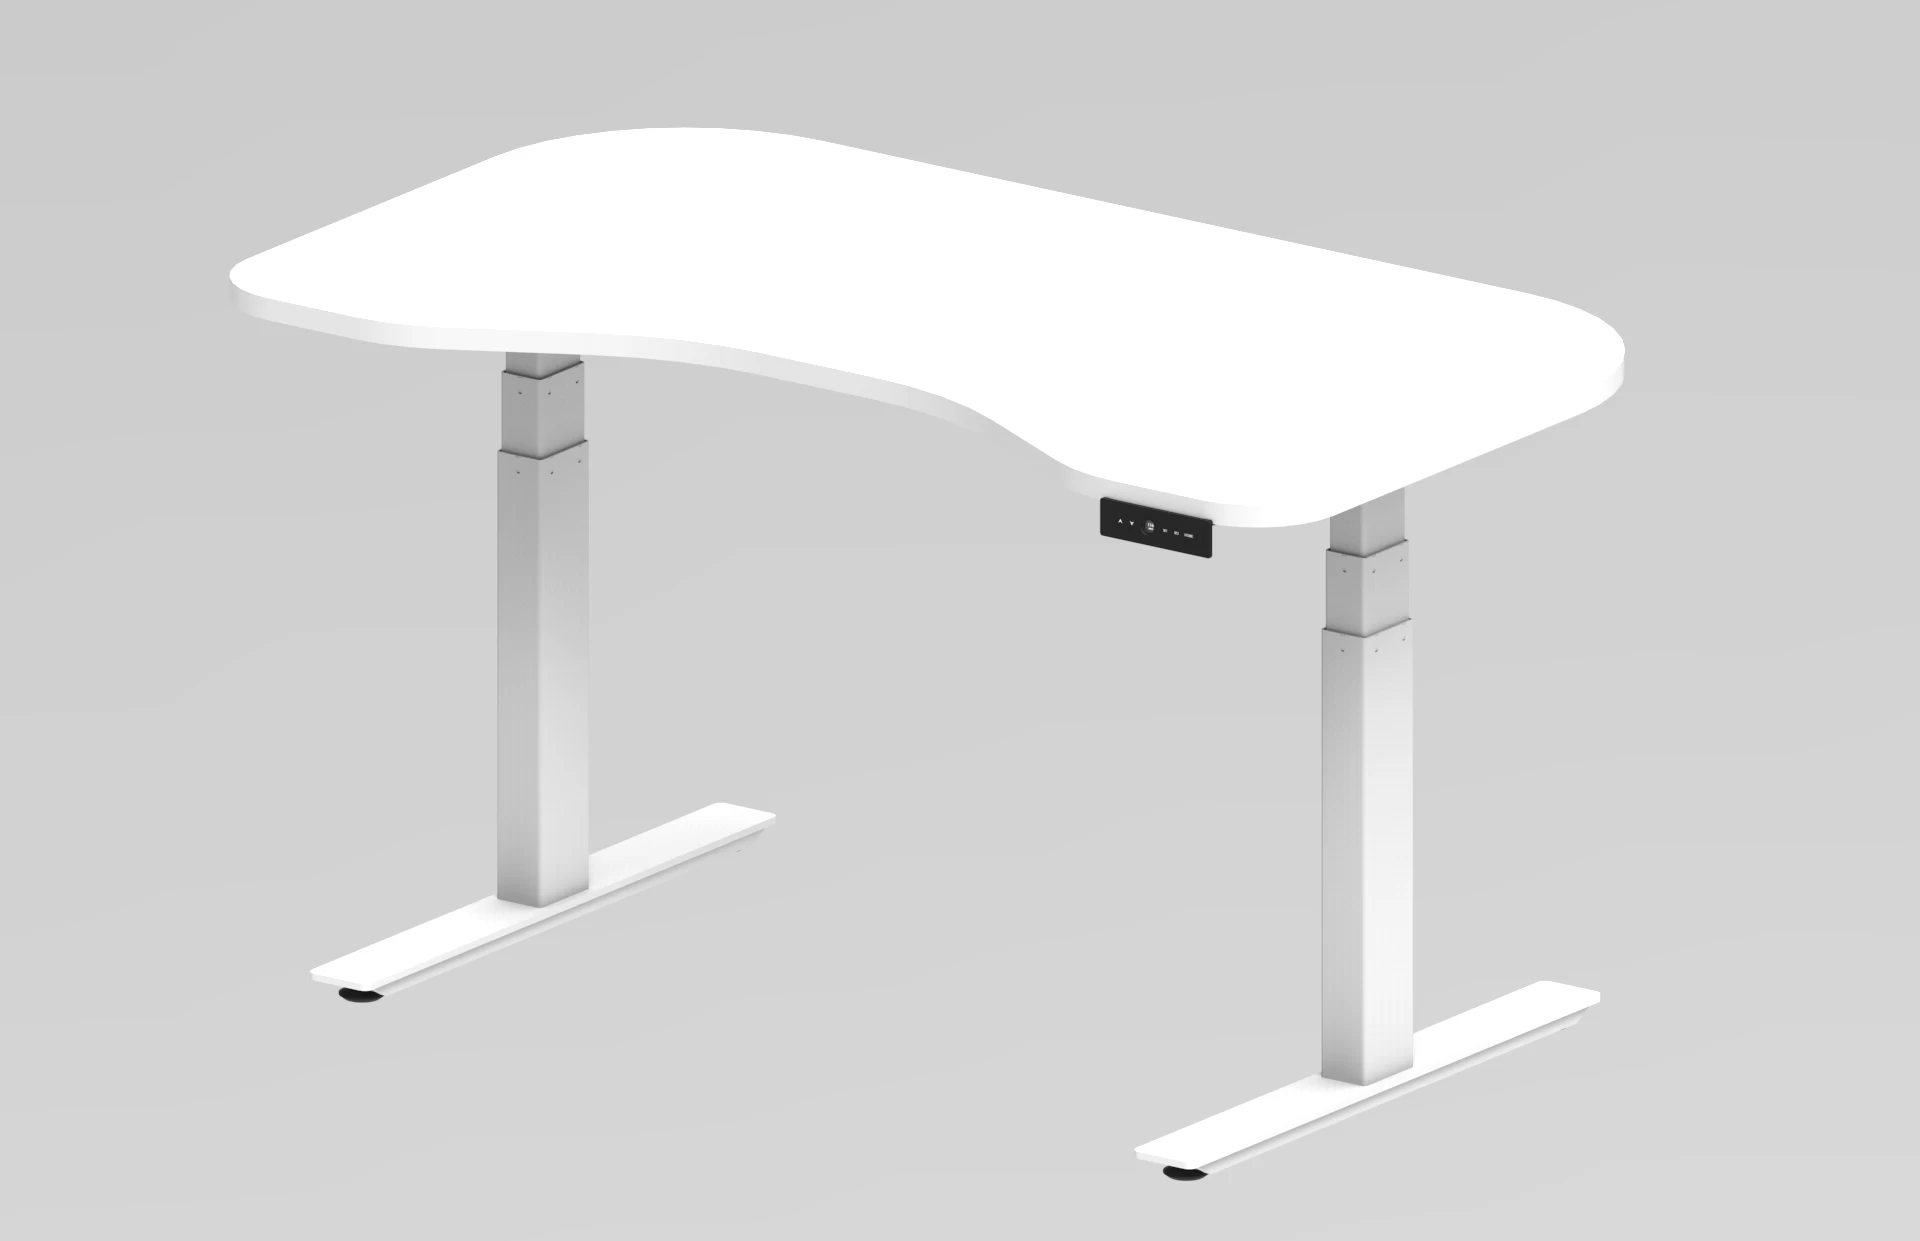 China Supplier Electric Height Adjustable Desk